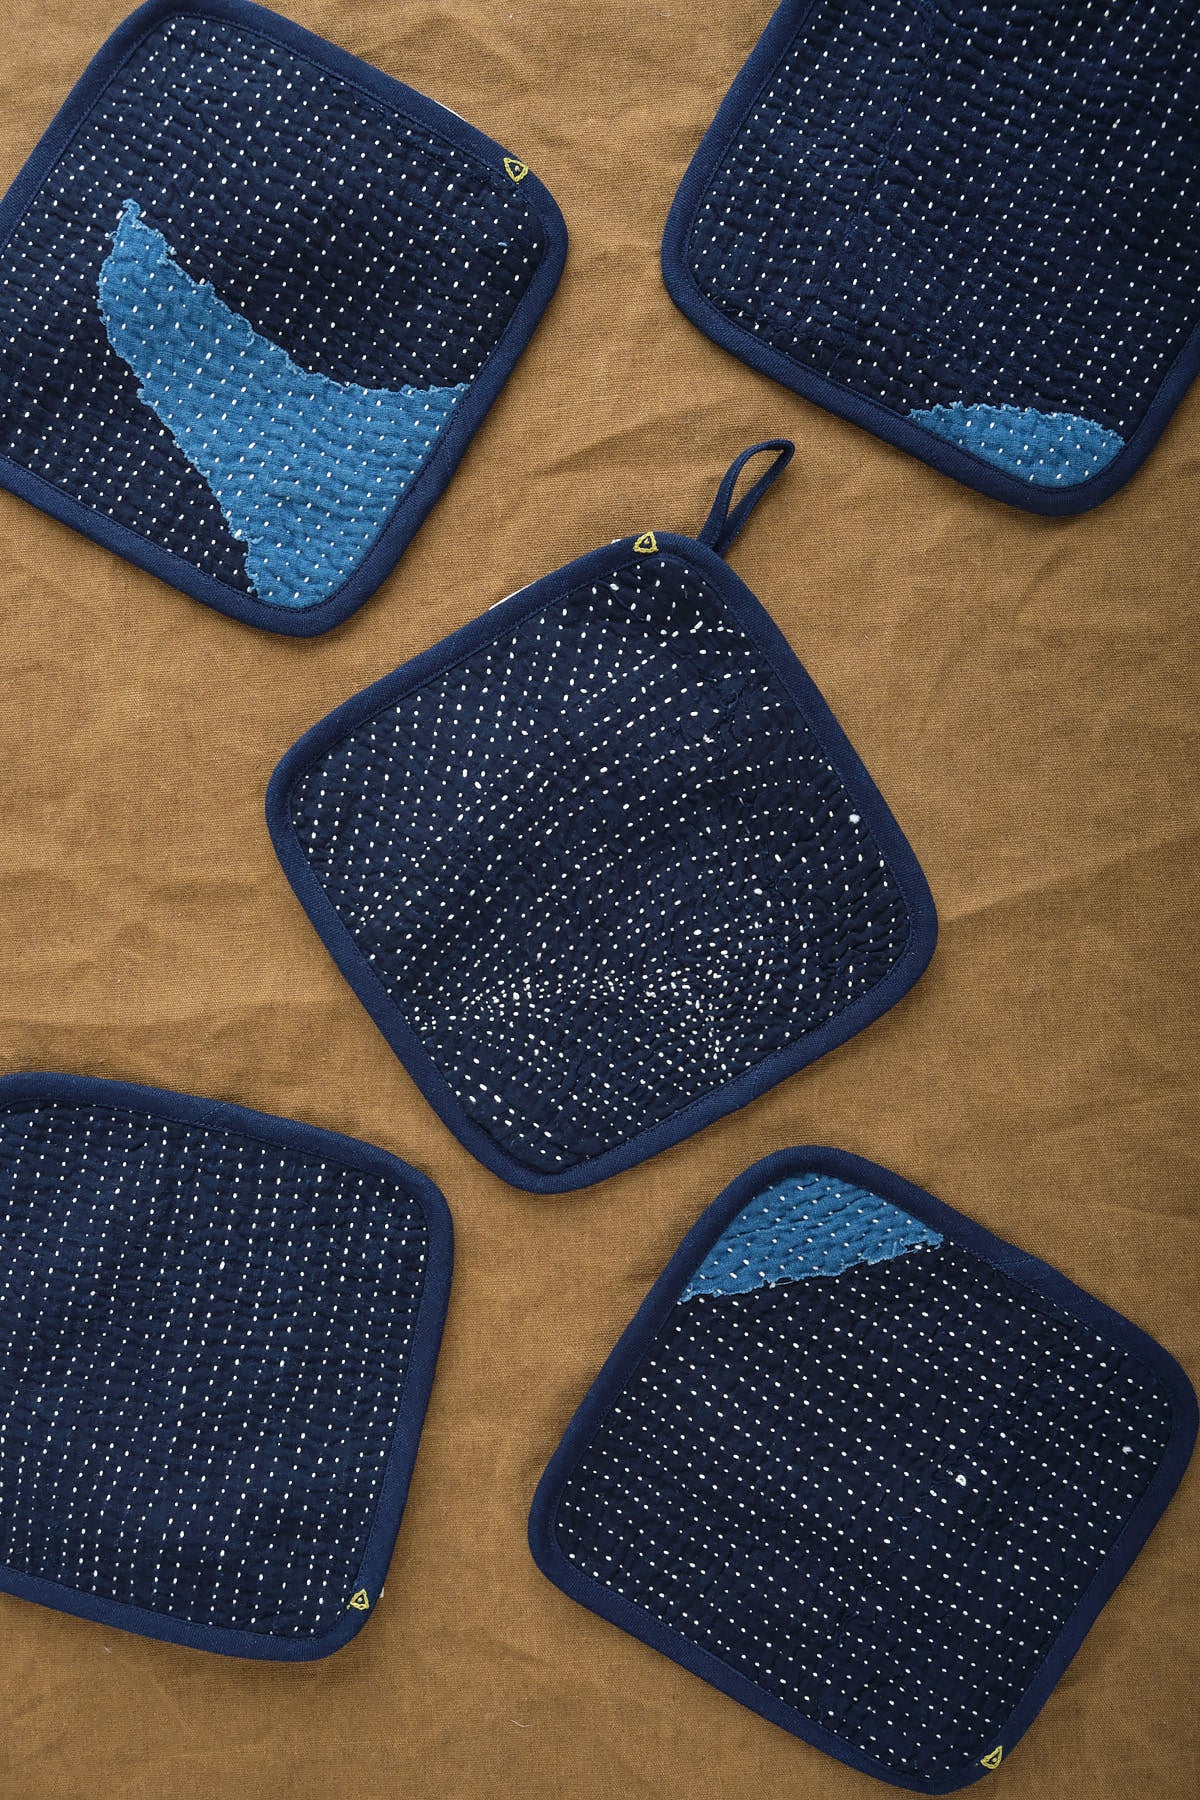 Eleven Eleven Hand-quilted Pot Holders in Indigo